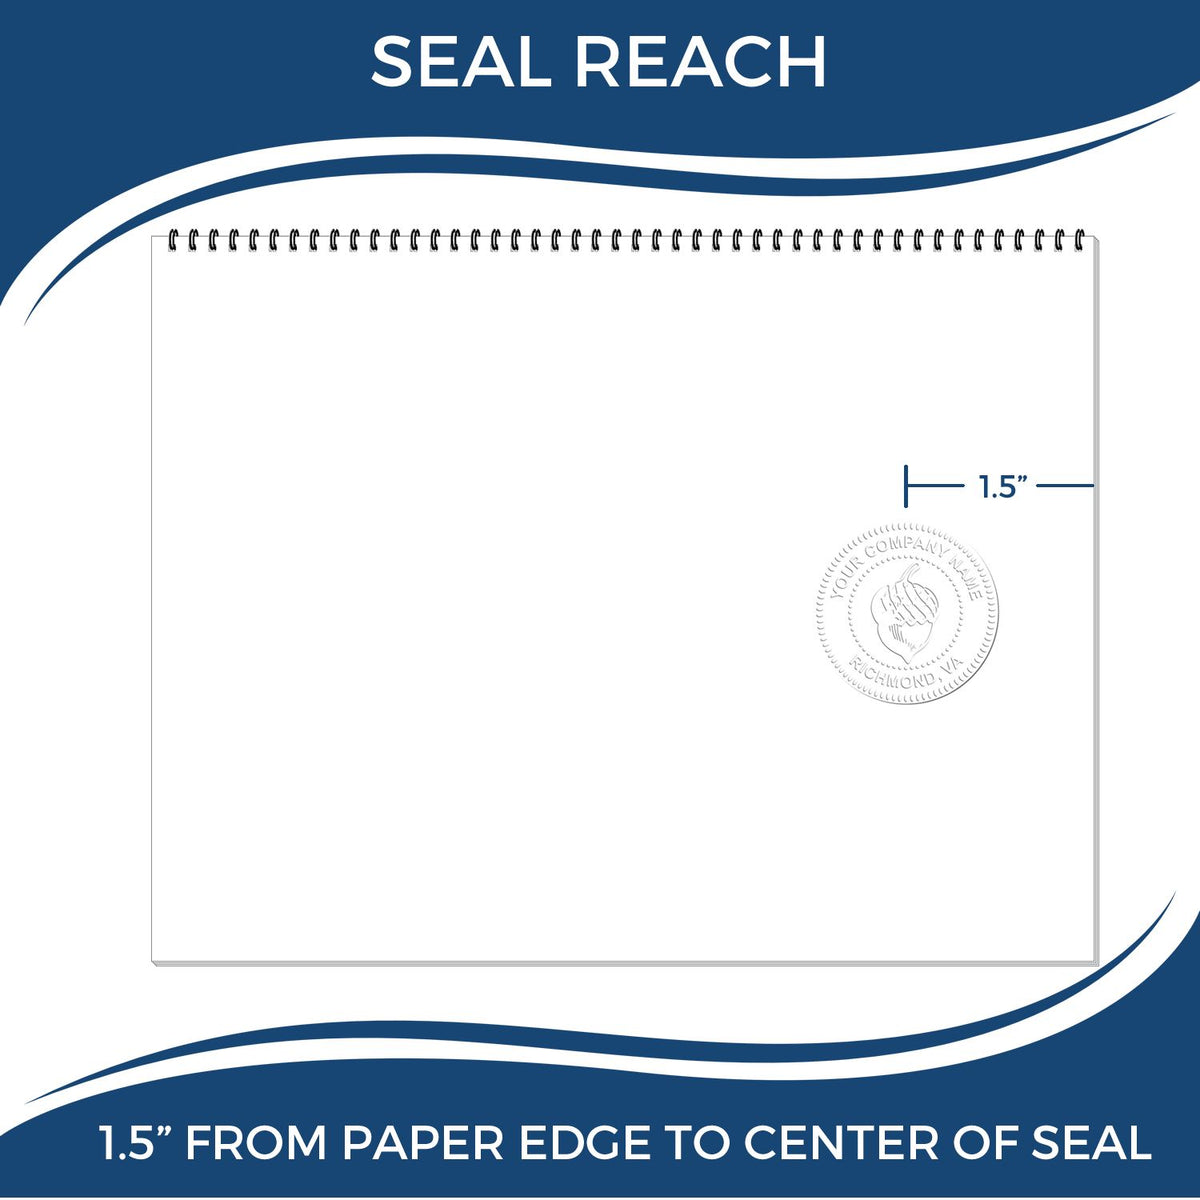 An infographic showing the seal reach which is represented by a ruler and a miniature seal image of the Handheld South Carolina Professional Geologist Embosser